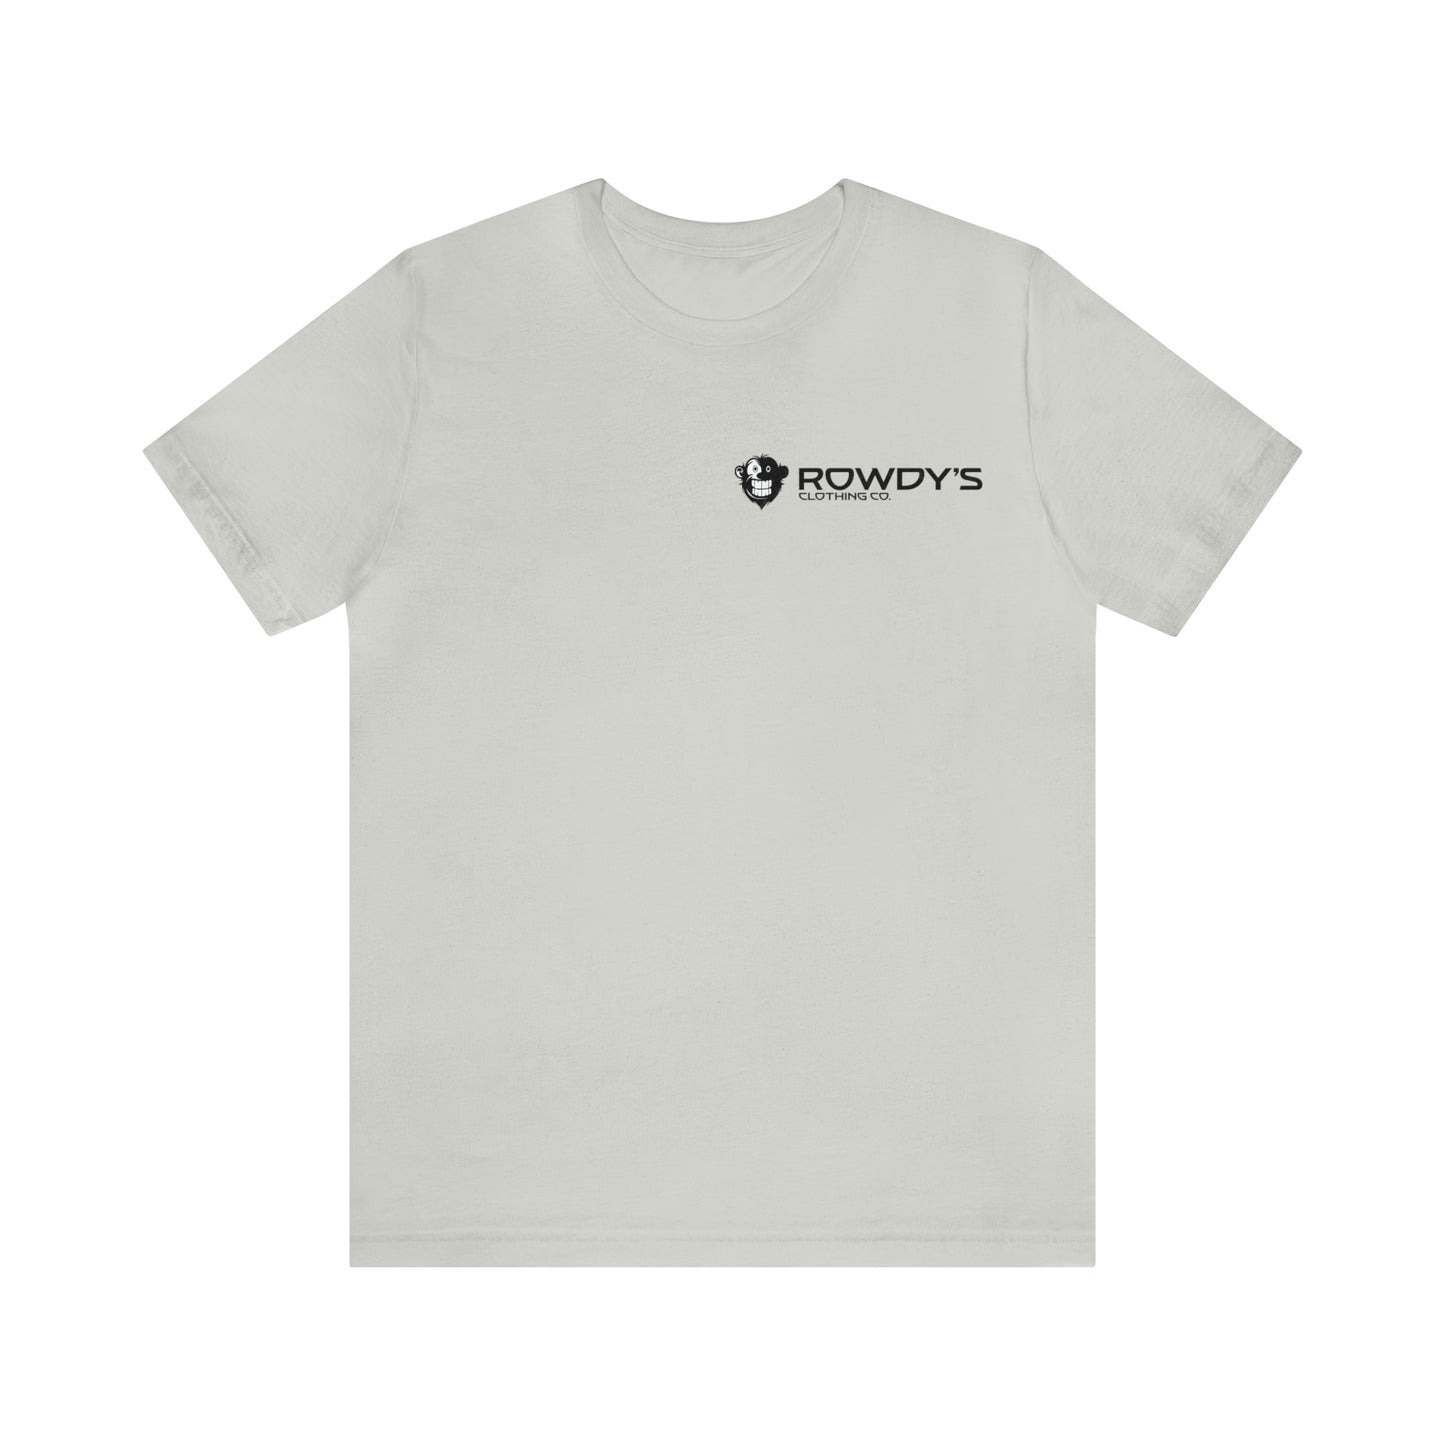 Rowdy's Clothing Co. - Front and Back Logo Print - Rowdy's Brand T-Shirt